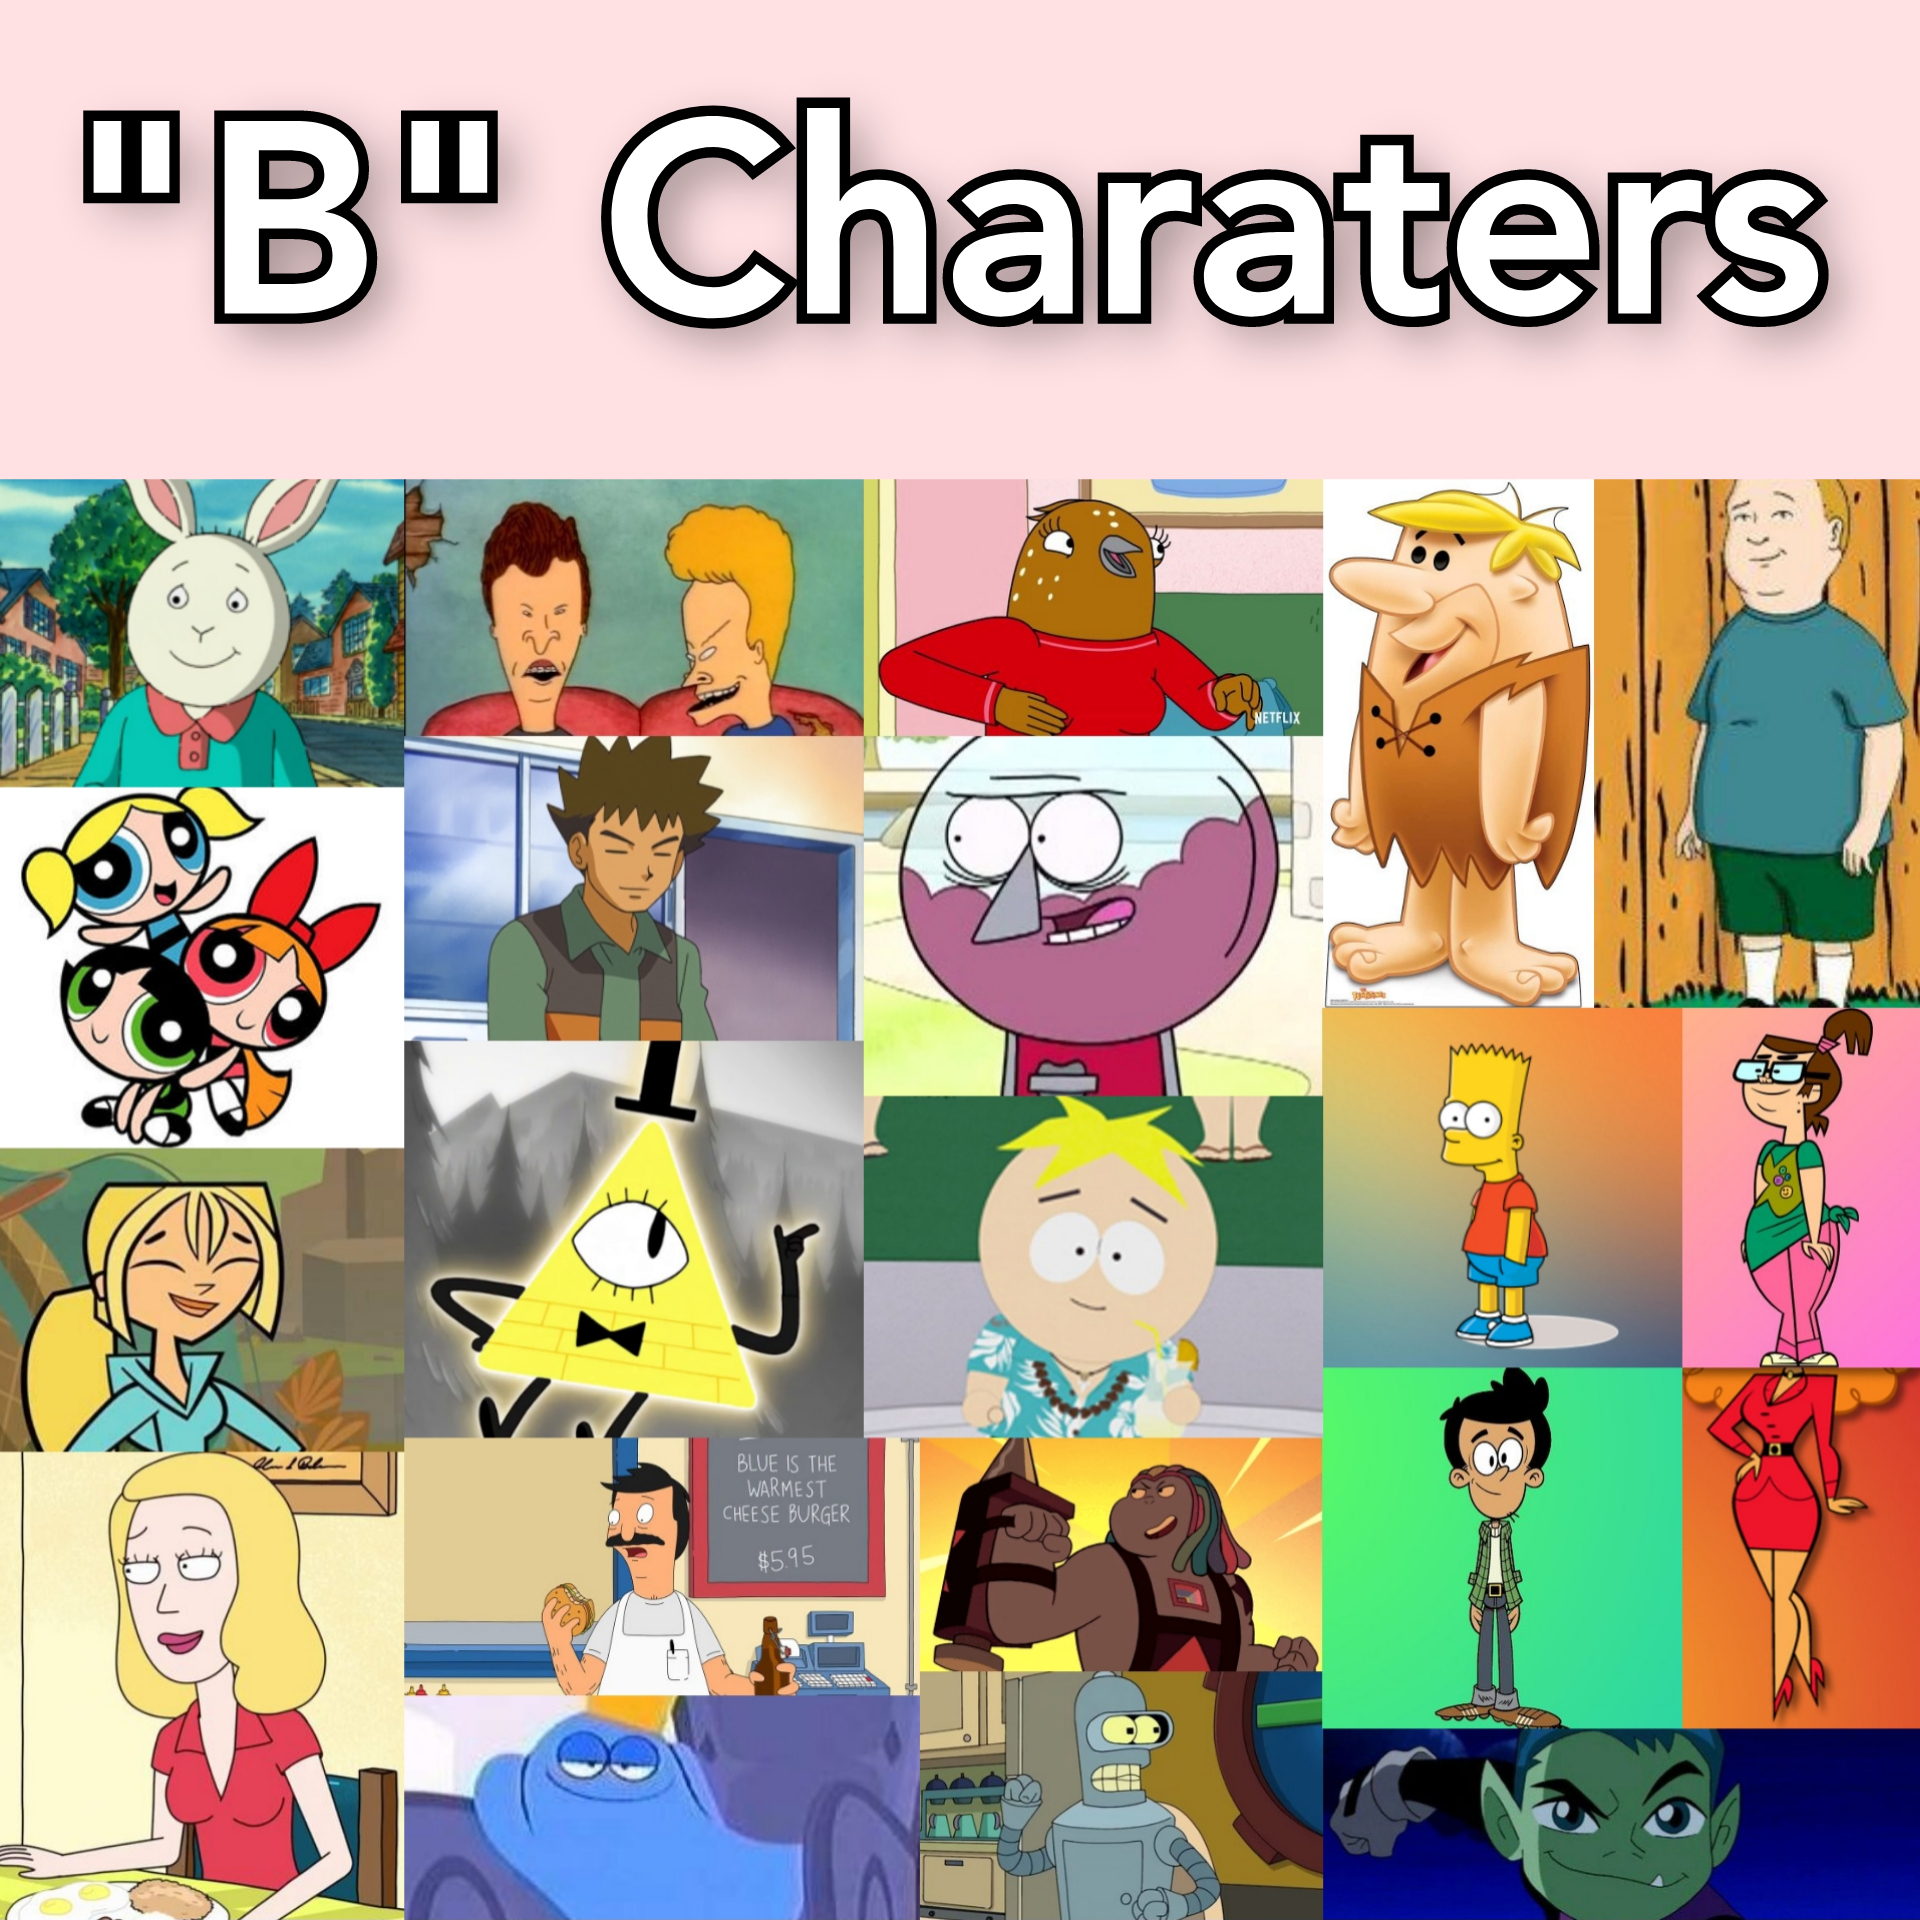 The B Charaters